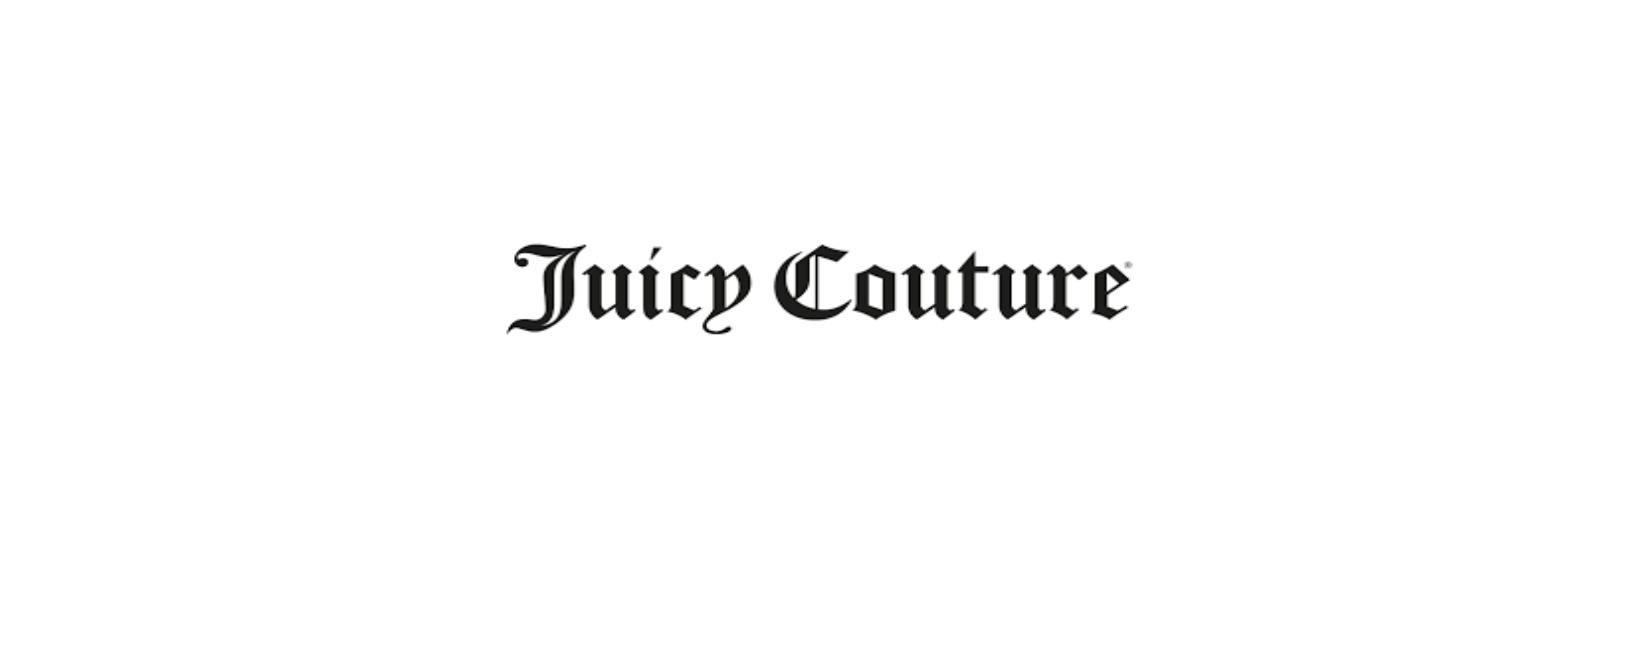 Juicy Couture Discount Code 2022